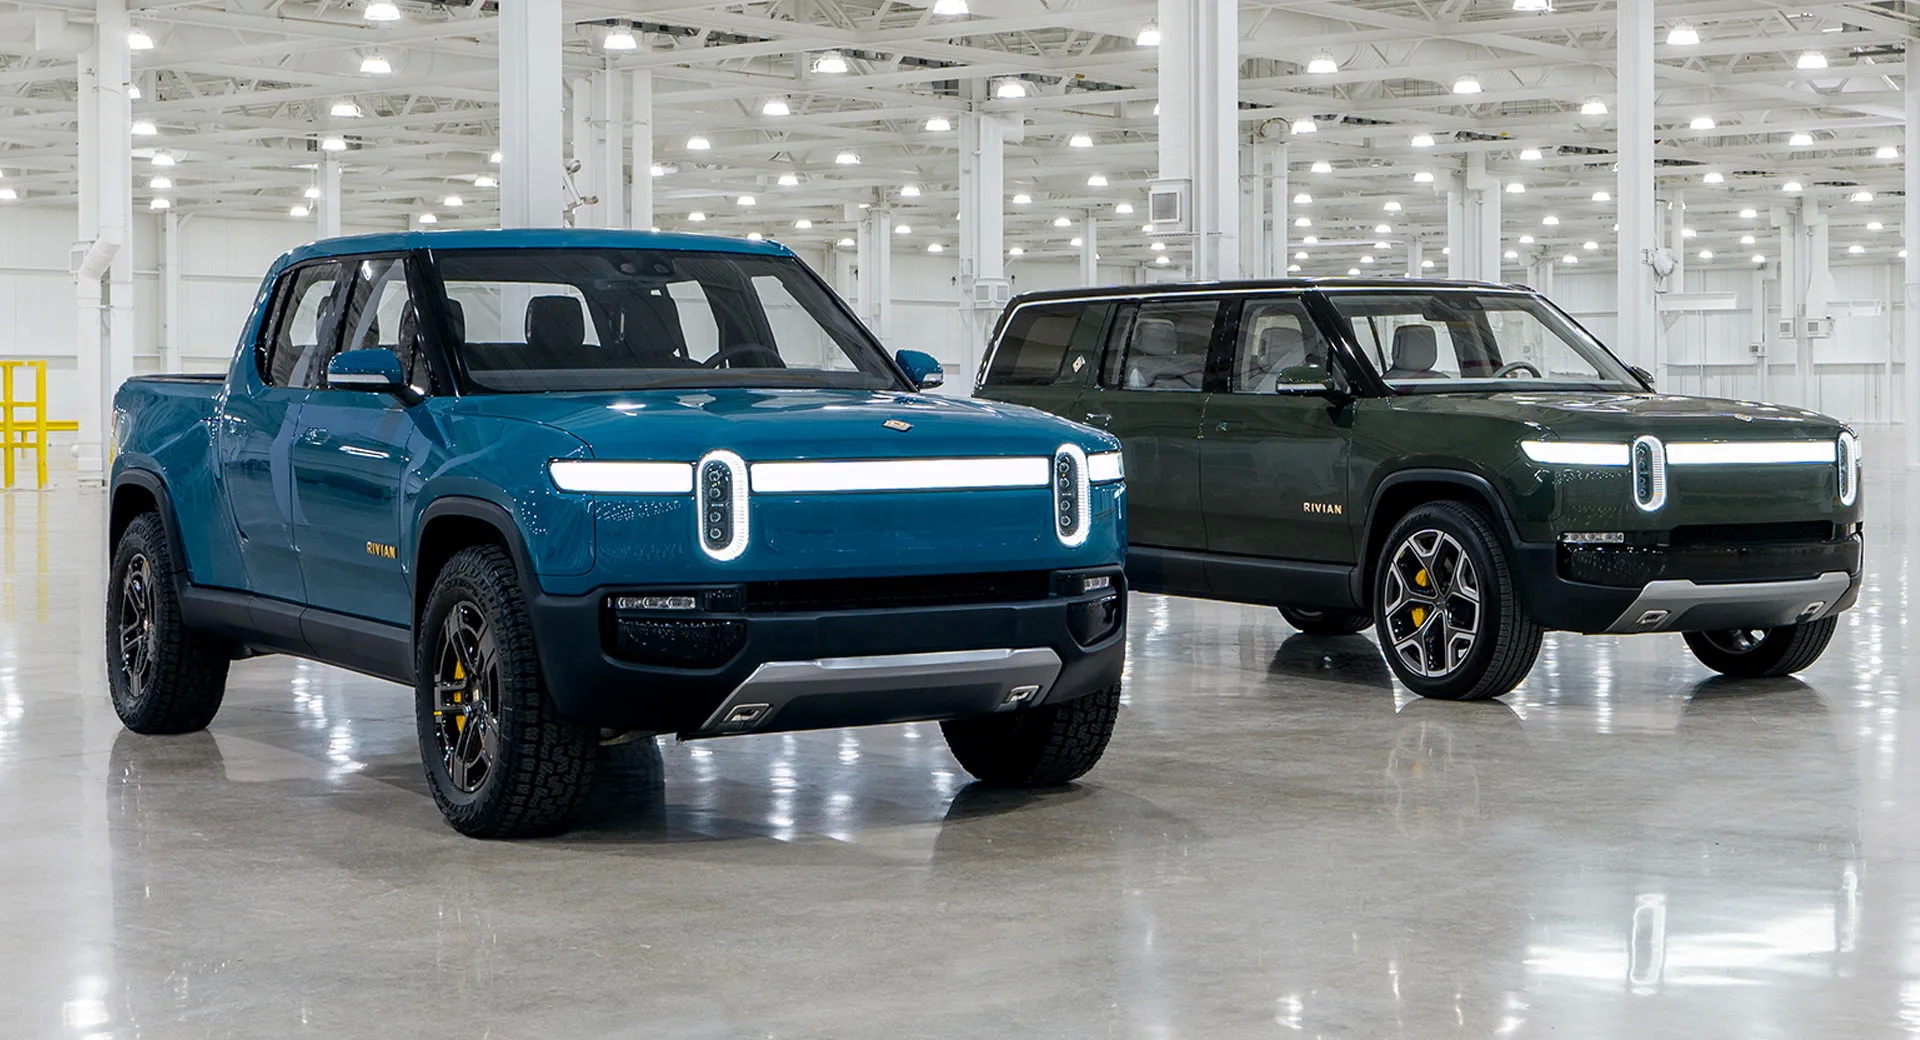 Rivian Targets China And Europe With Smaller Future EVs